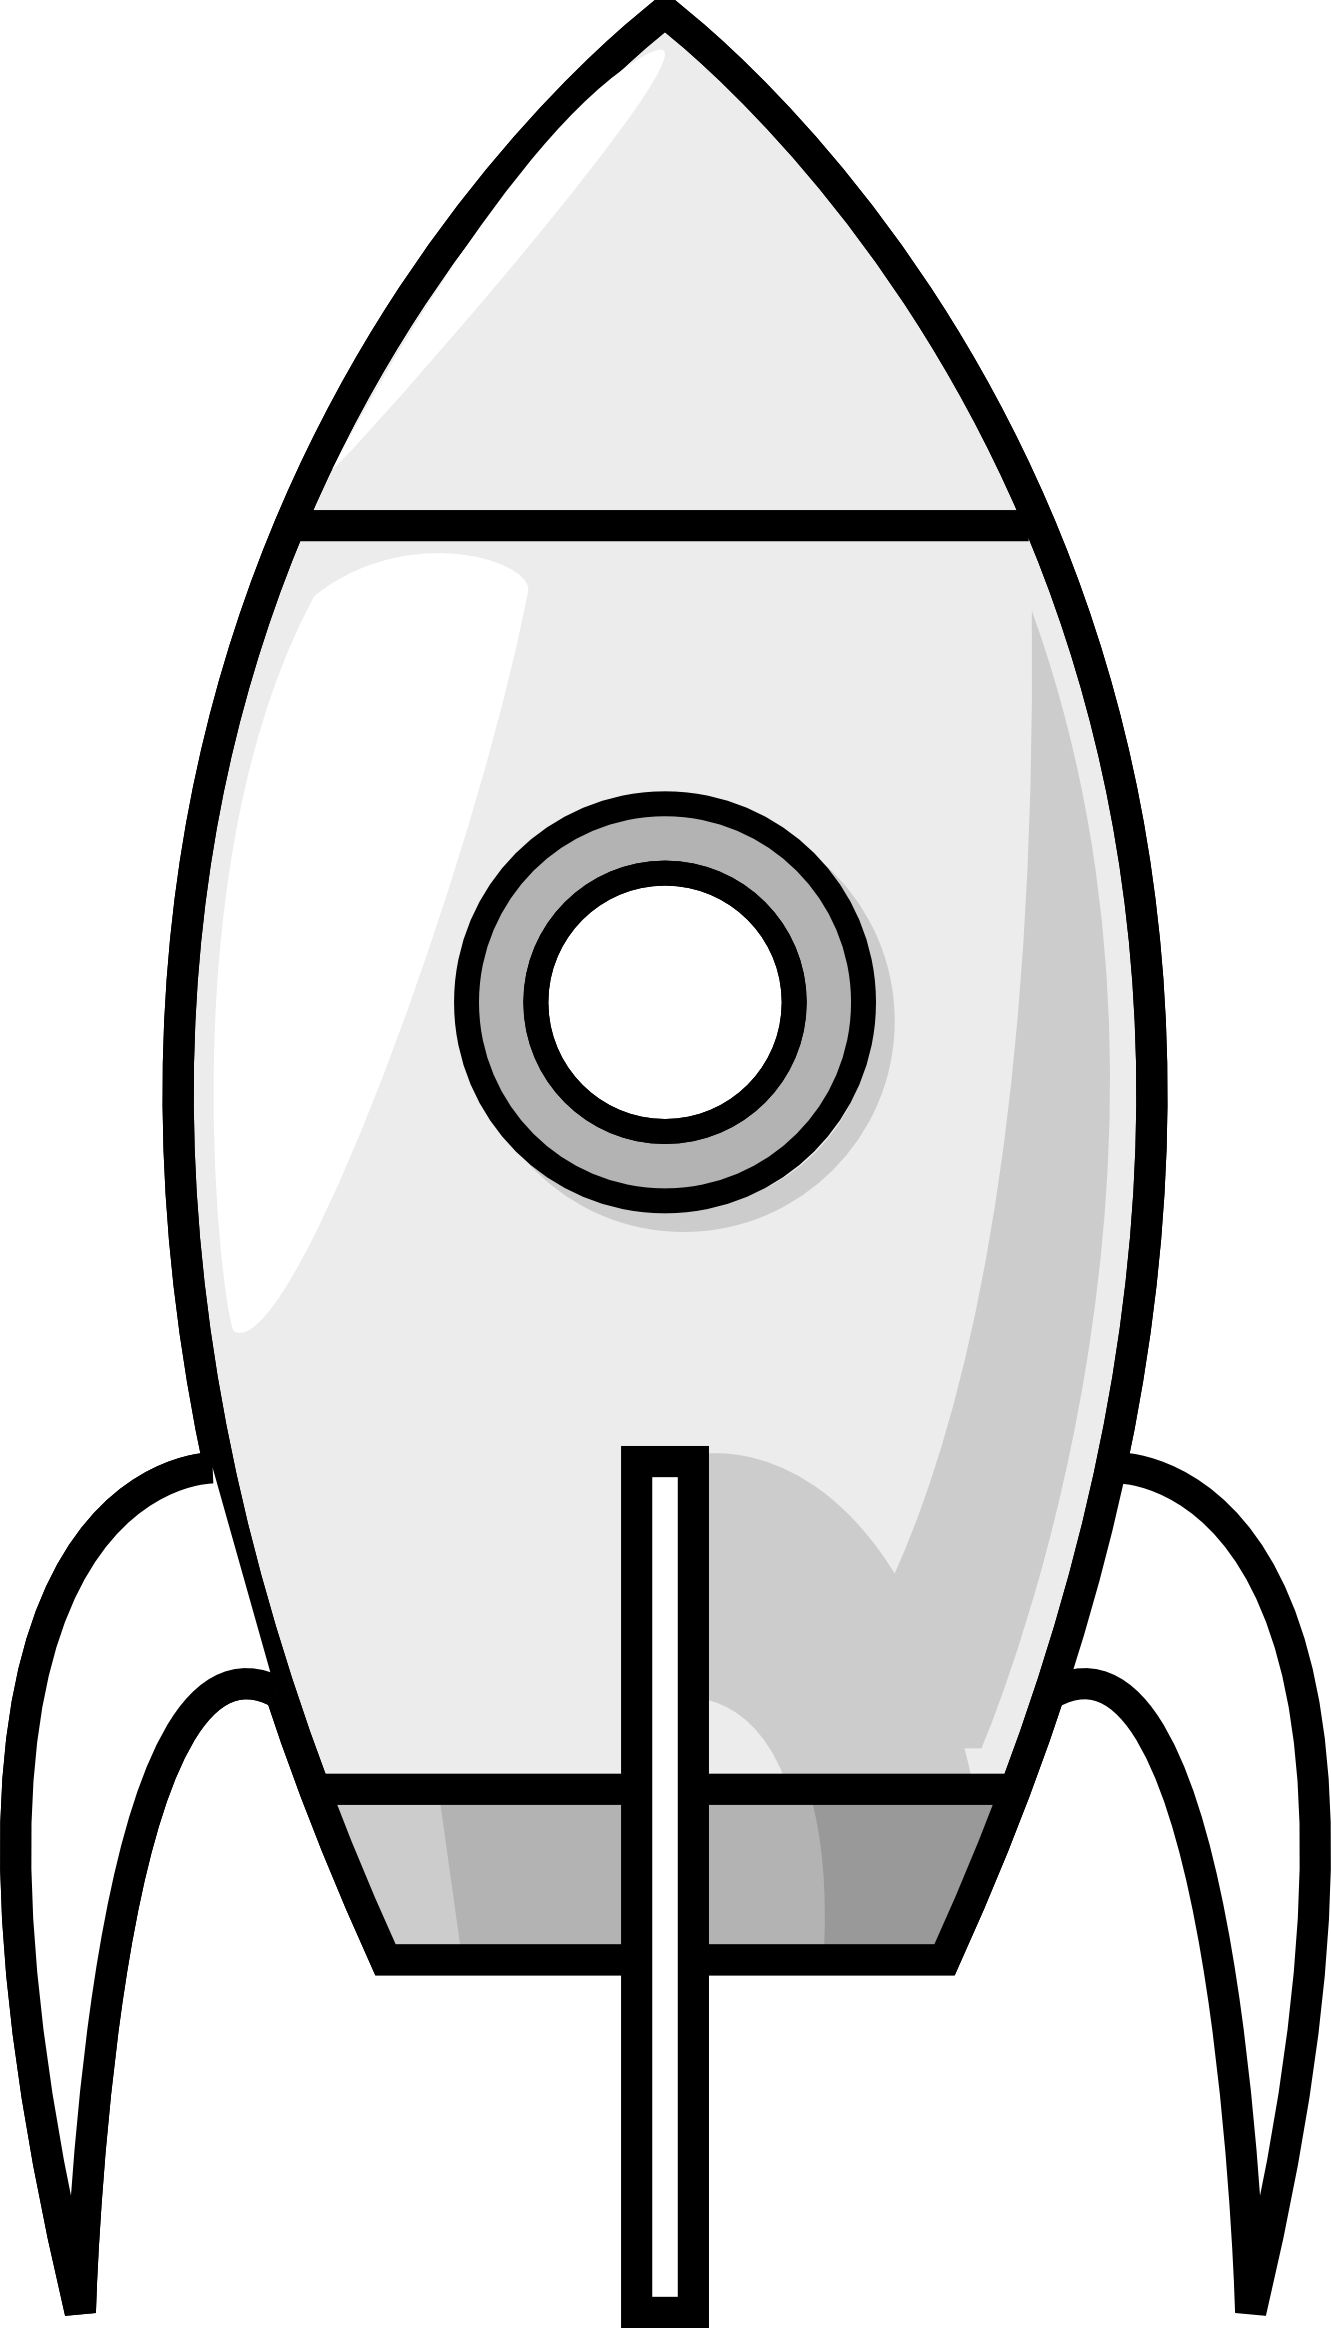 Spaceship clipart easy cartoon. Use with the straw